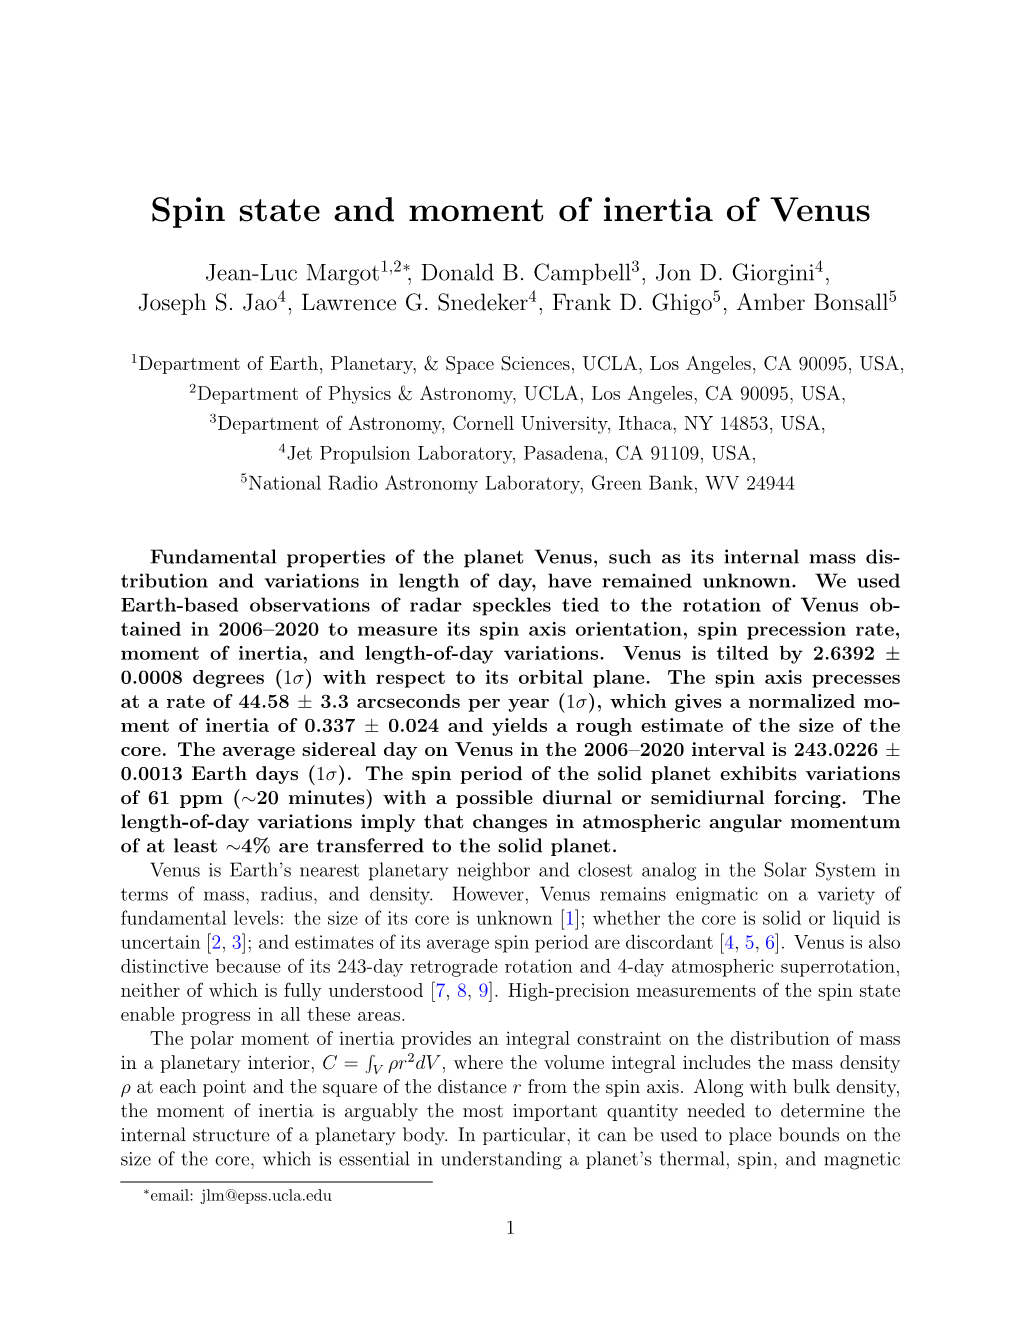 Spin State and Moment of Inertia of Venus